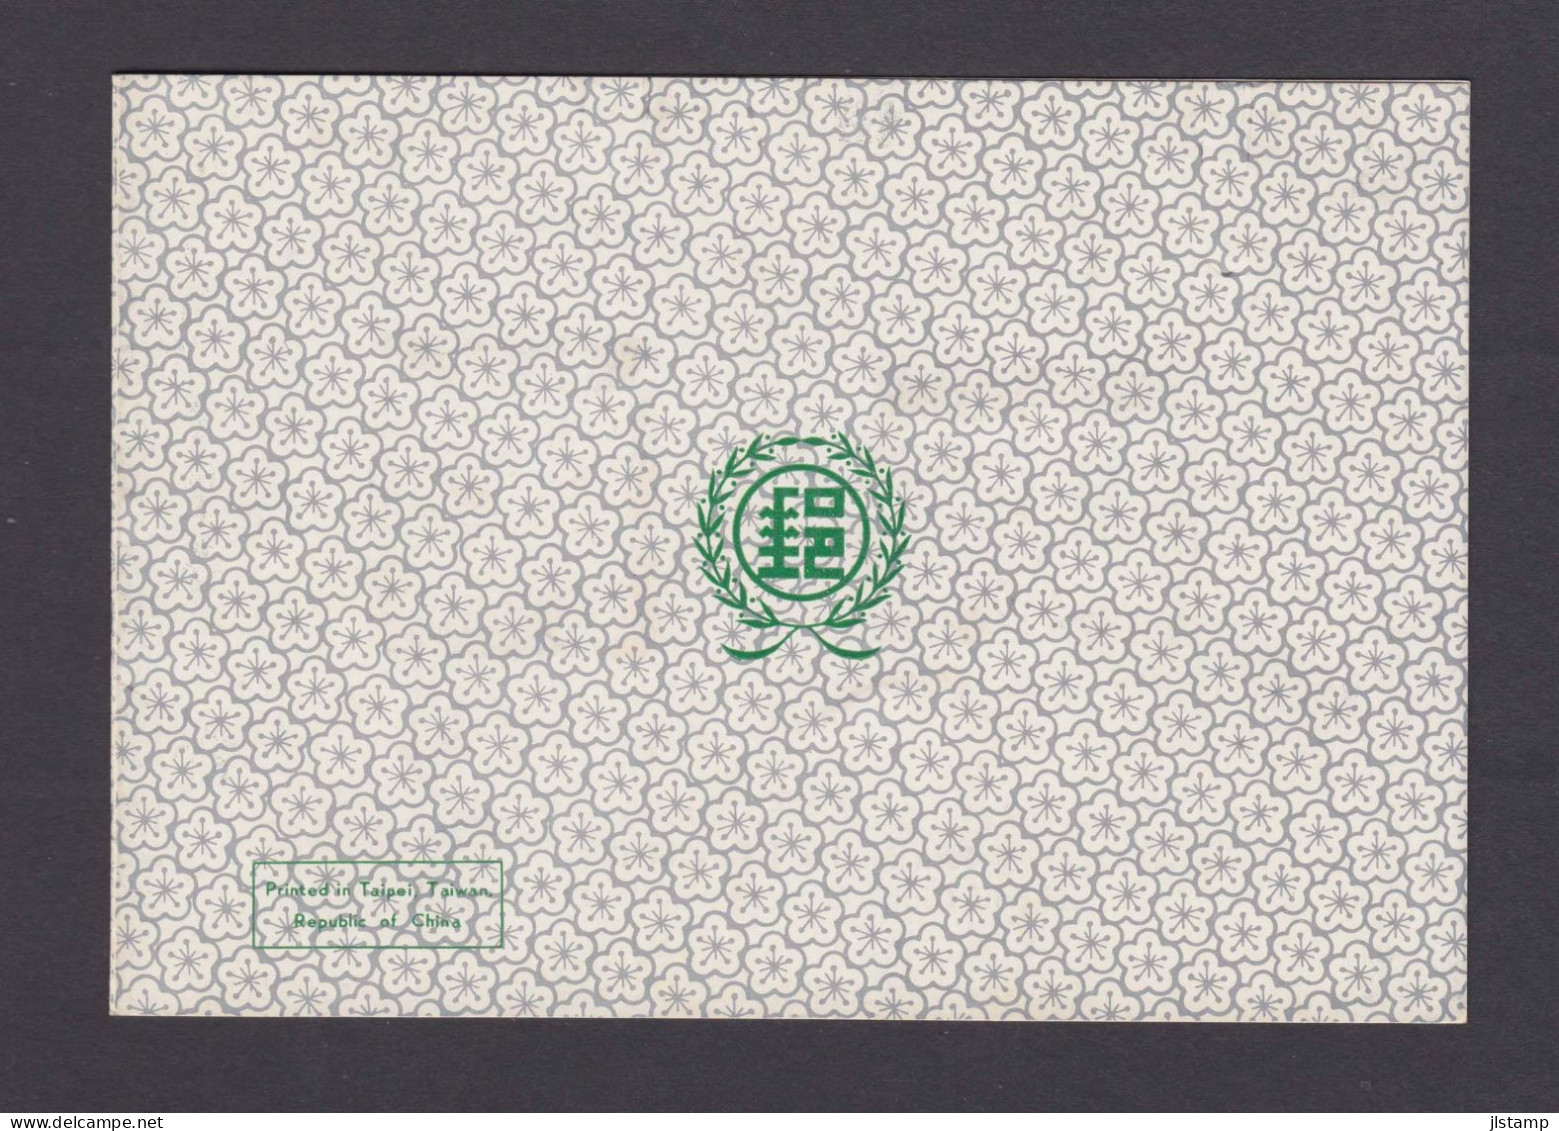 China Taiwan 1961 50 Anniv. Of Republic Of China,Folder With Stamps And Sheet,Scott# 1321-1322a, VF - Briefe U. Dokumente